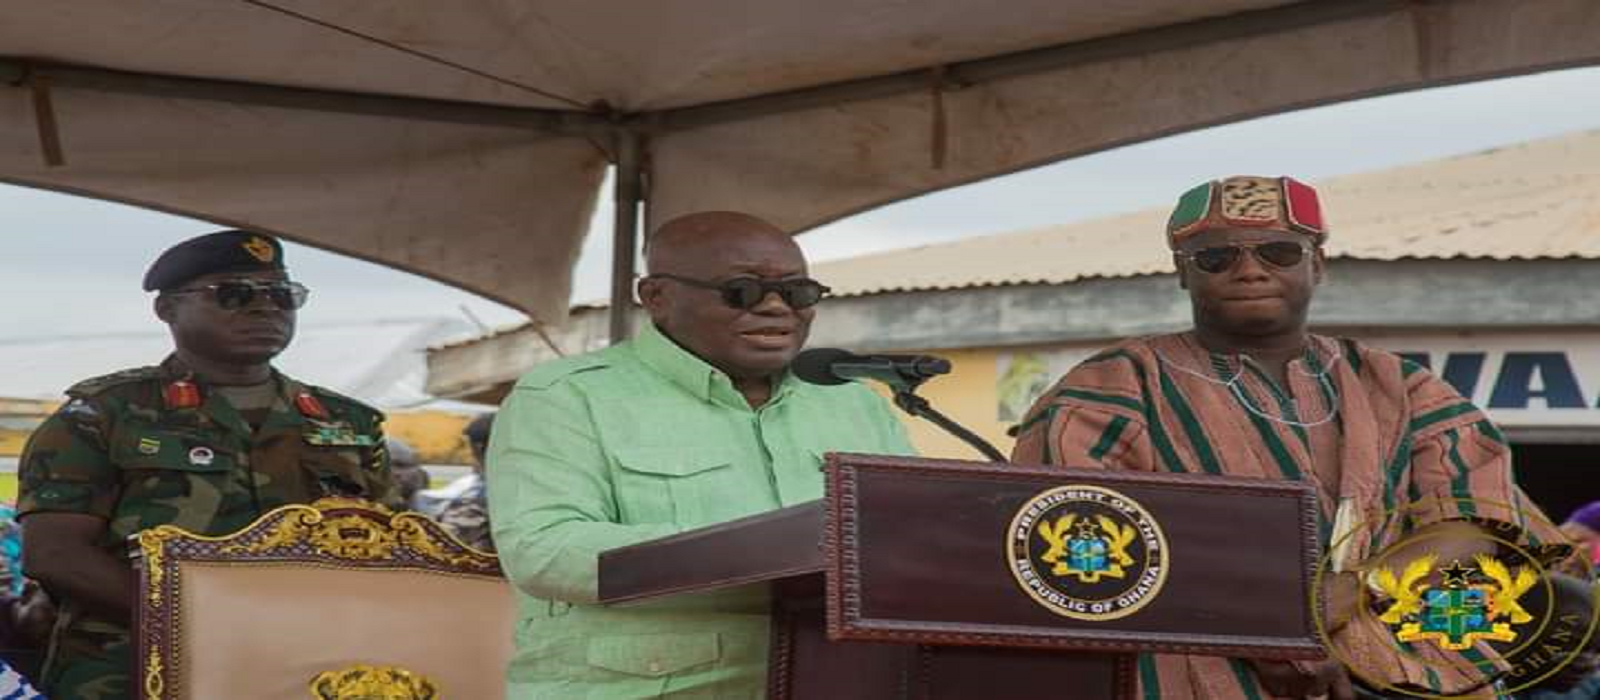 THE PRESIDENT VISITS TO CUT SOD ON THE YENDI TOWN DUAL ROAD PROJECT UNDER THE EASTERN CORRIDOR PROJECT